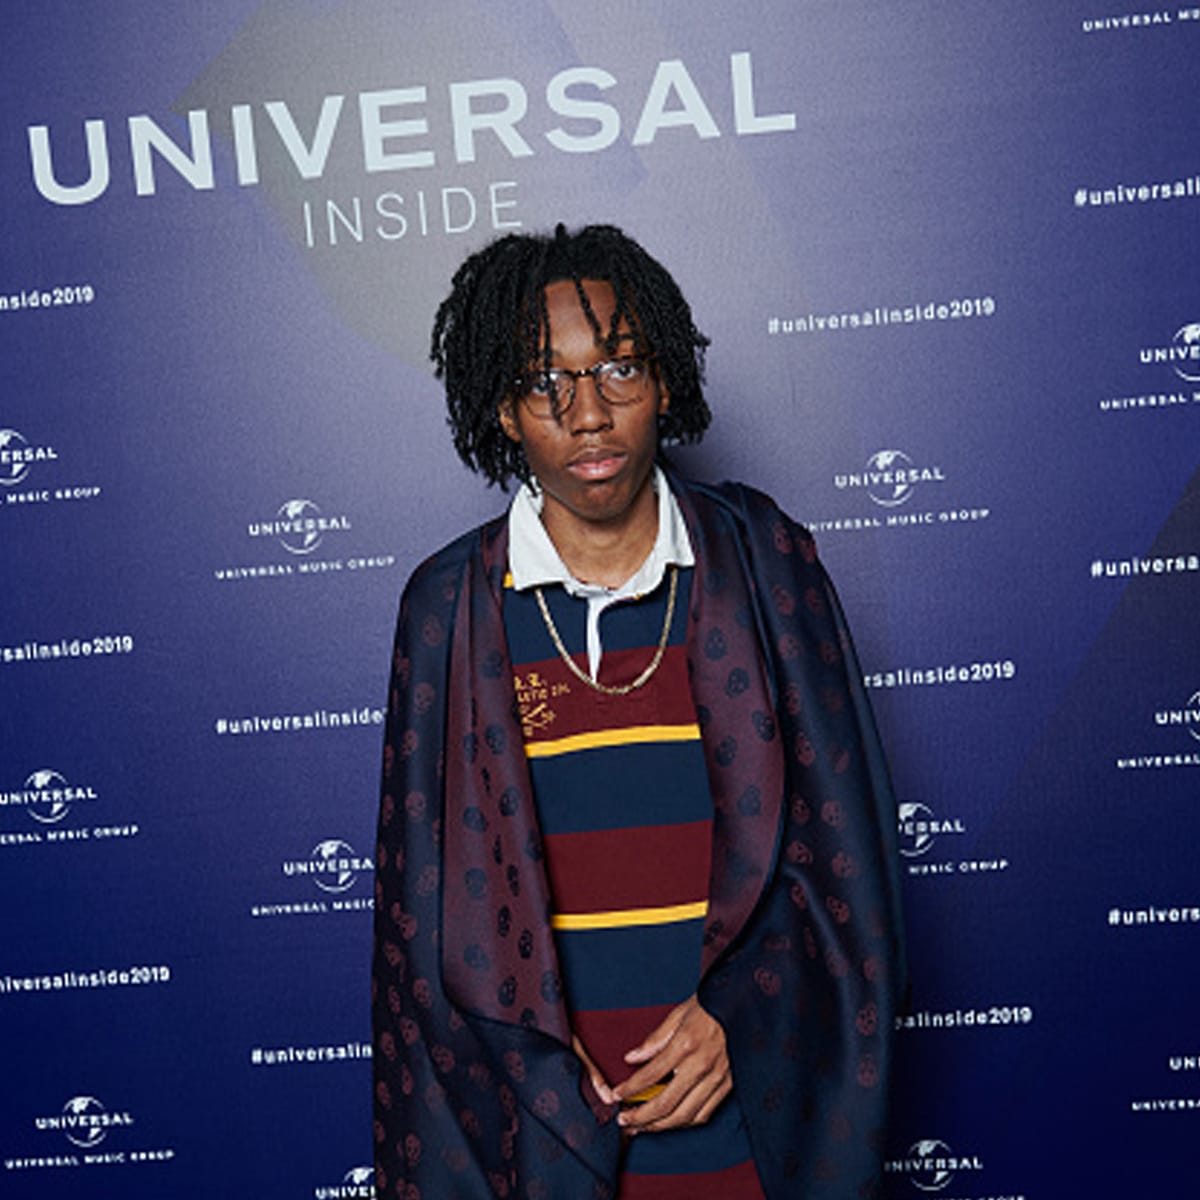 Lil Tecca aka Tyler-Justin Sharpe poses for a photo during Universal Inside 2019